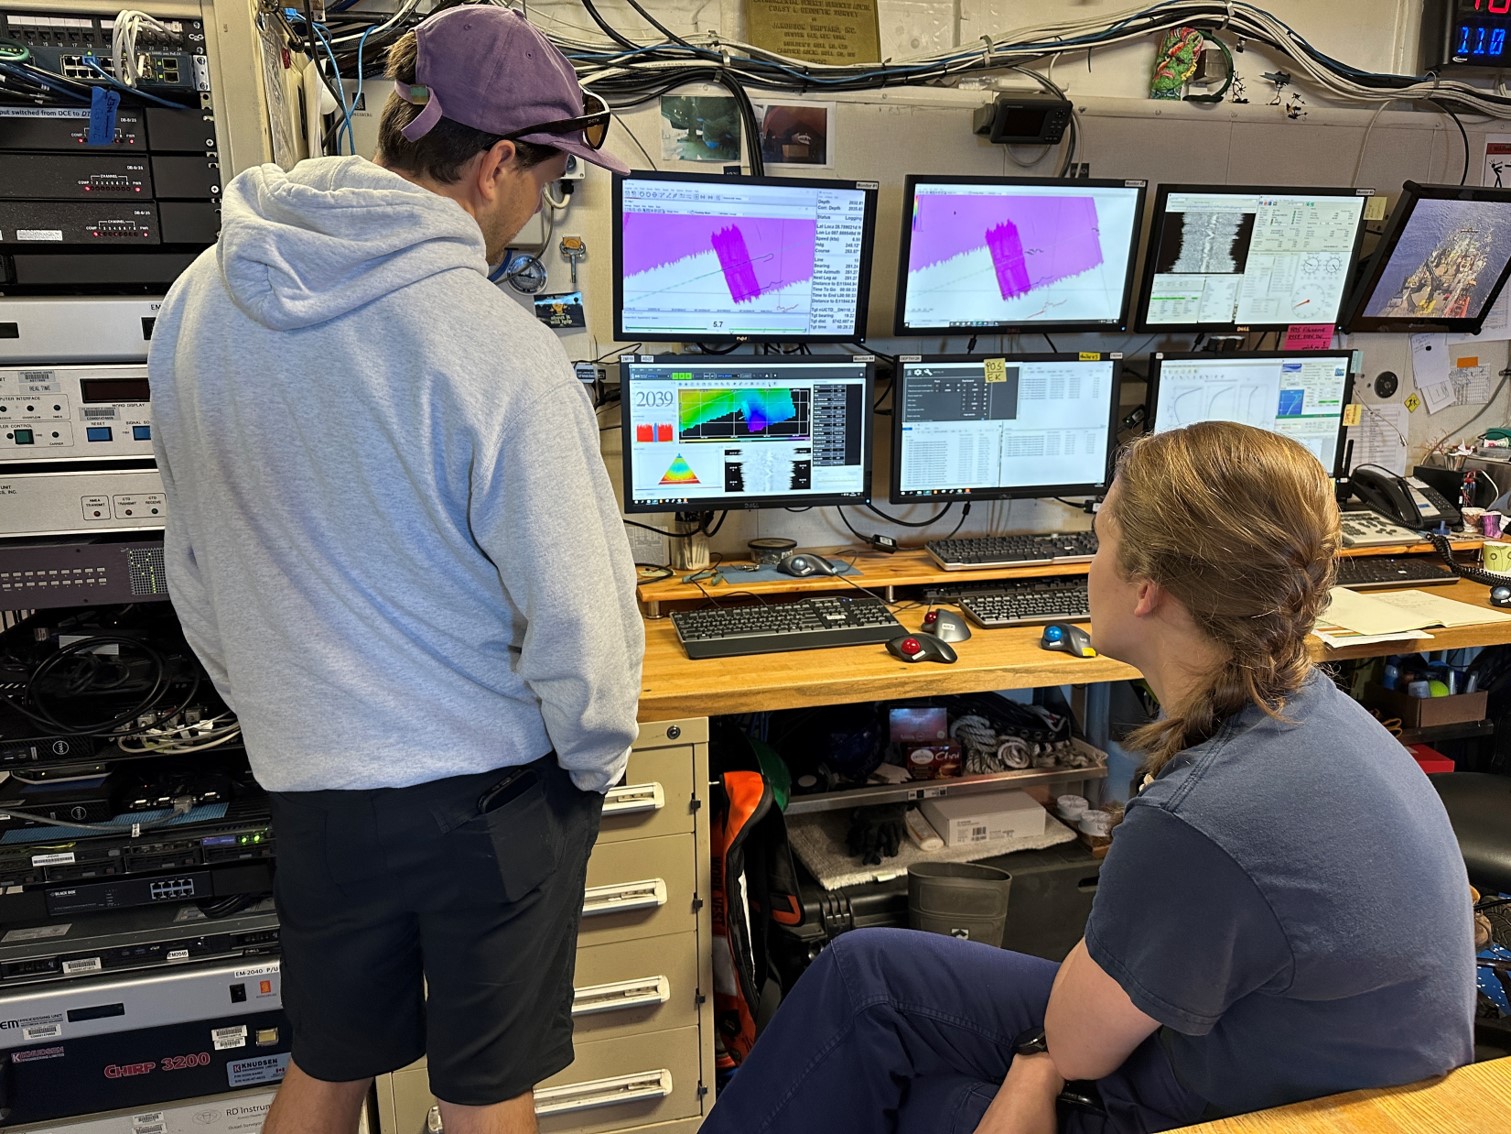  two scientists look at several computer screens showing multibeam sonar data